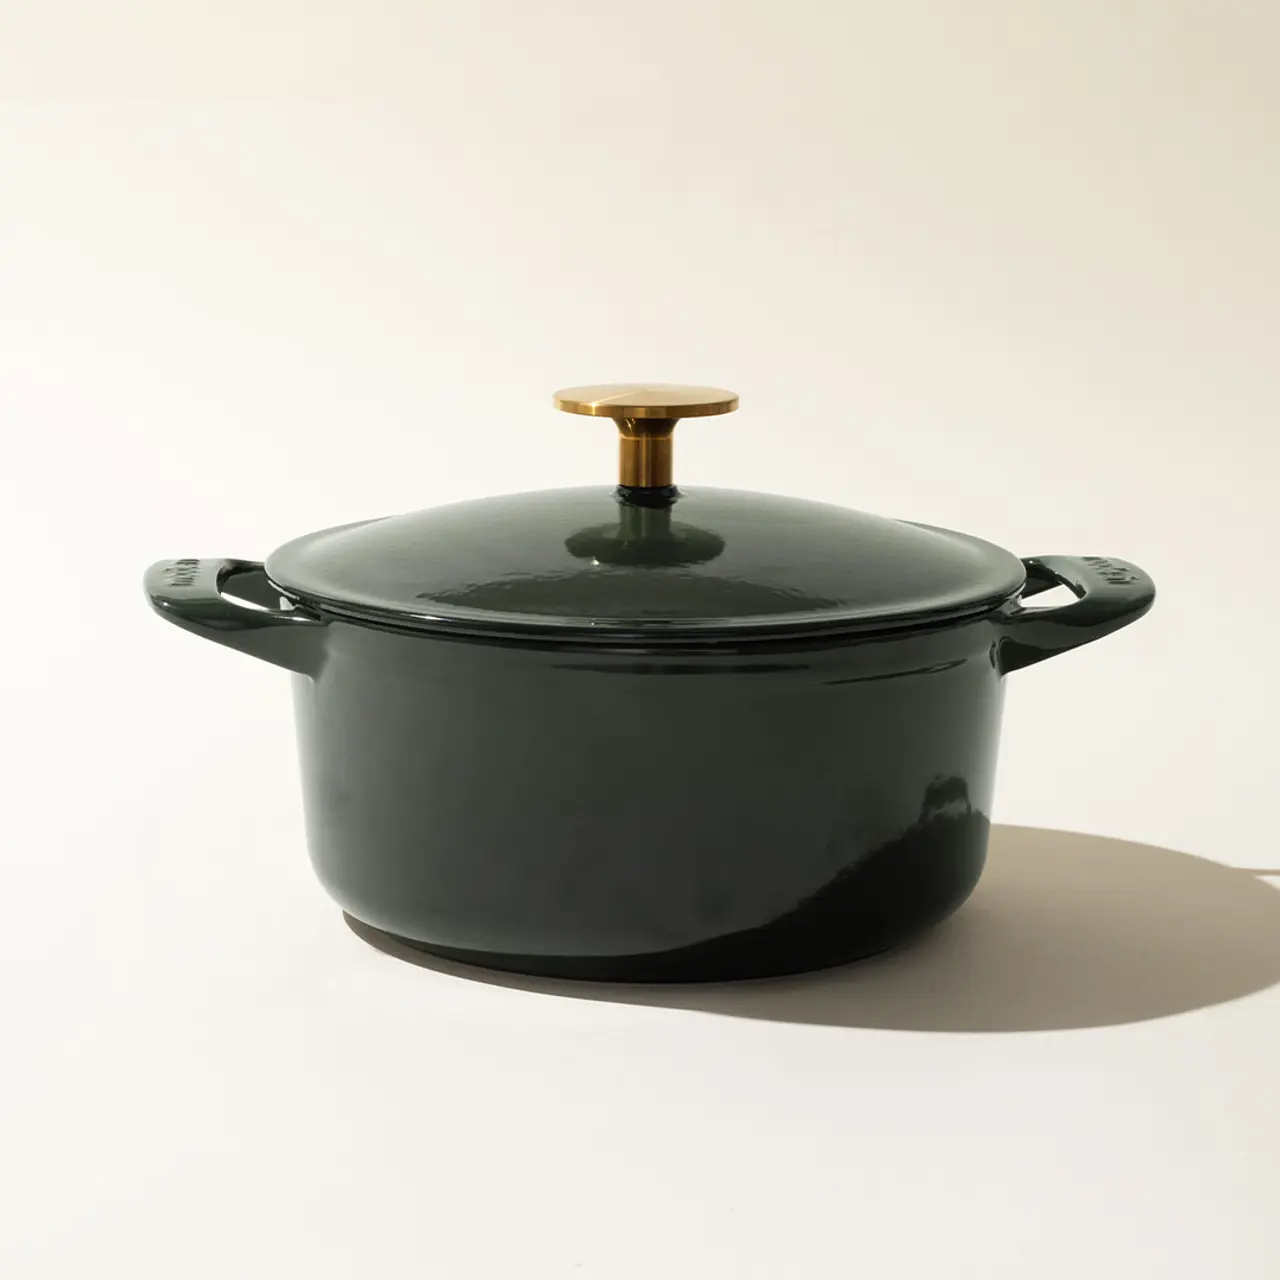 A dark-colored cooking pot with a lid featuring a contrasting gold-colored handle, set against a neutral background.